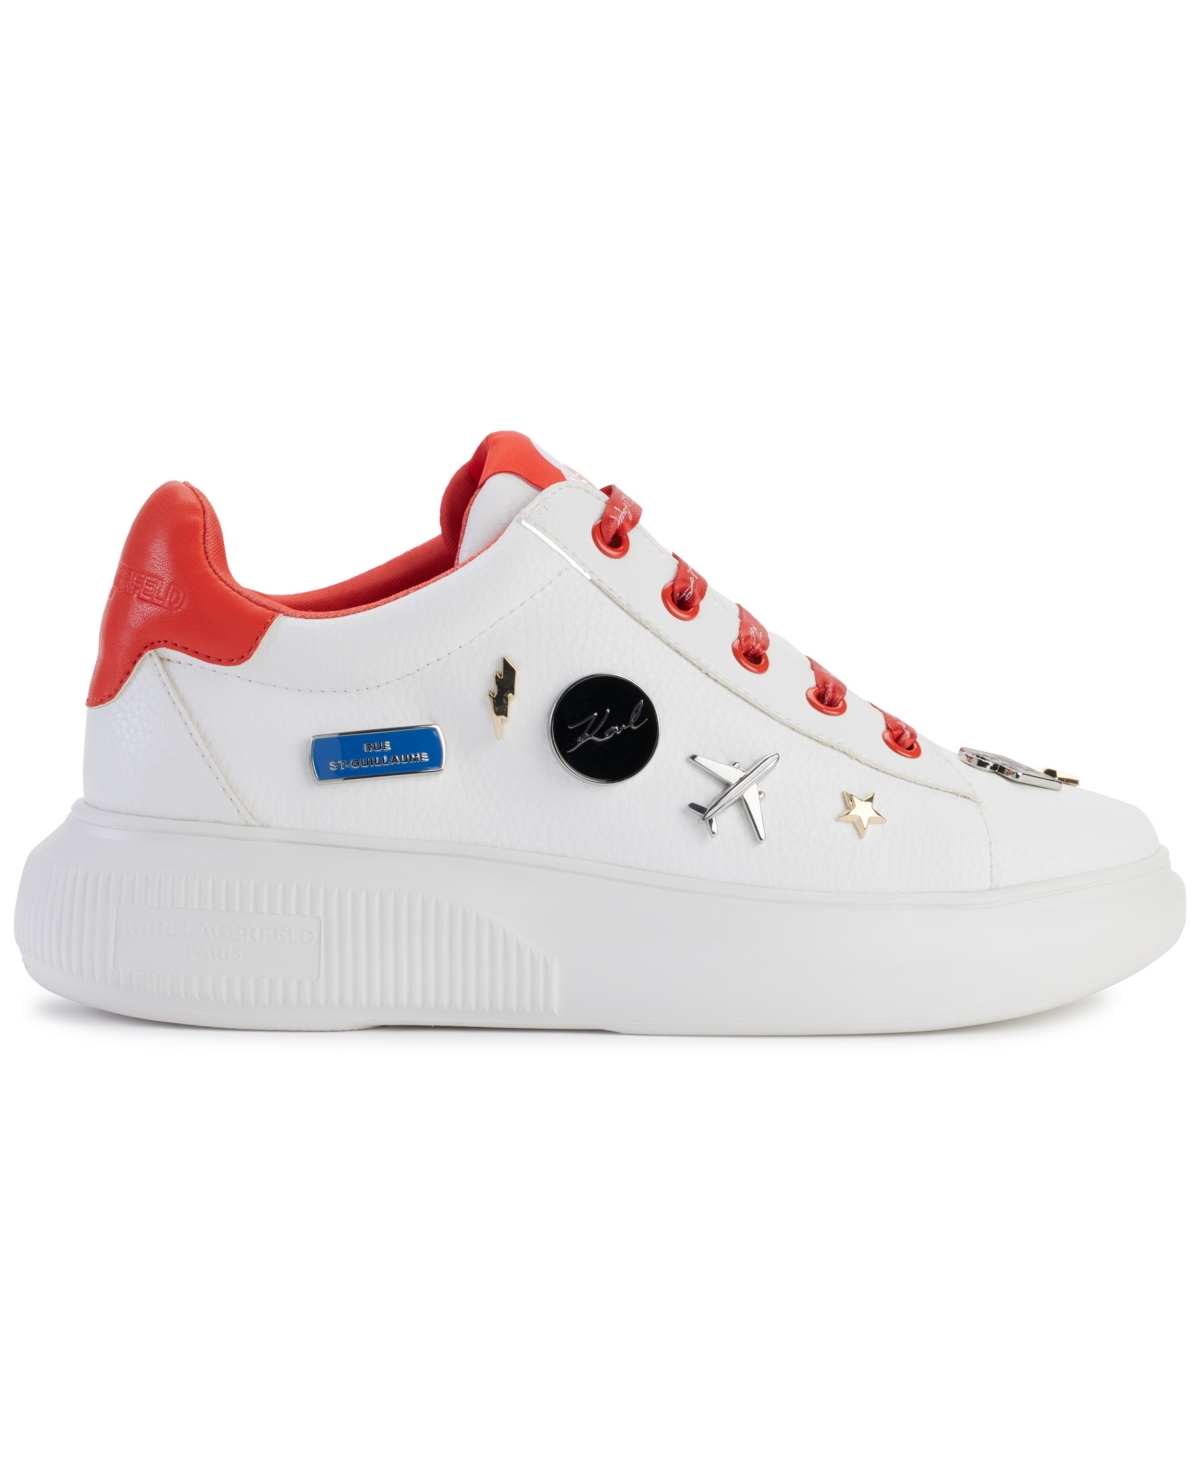 Shop Karl Lagerfeld Justina Lace Up Platform Sneakers In Bright White,navy